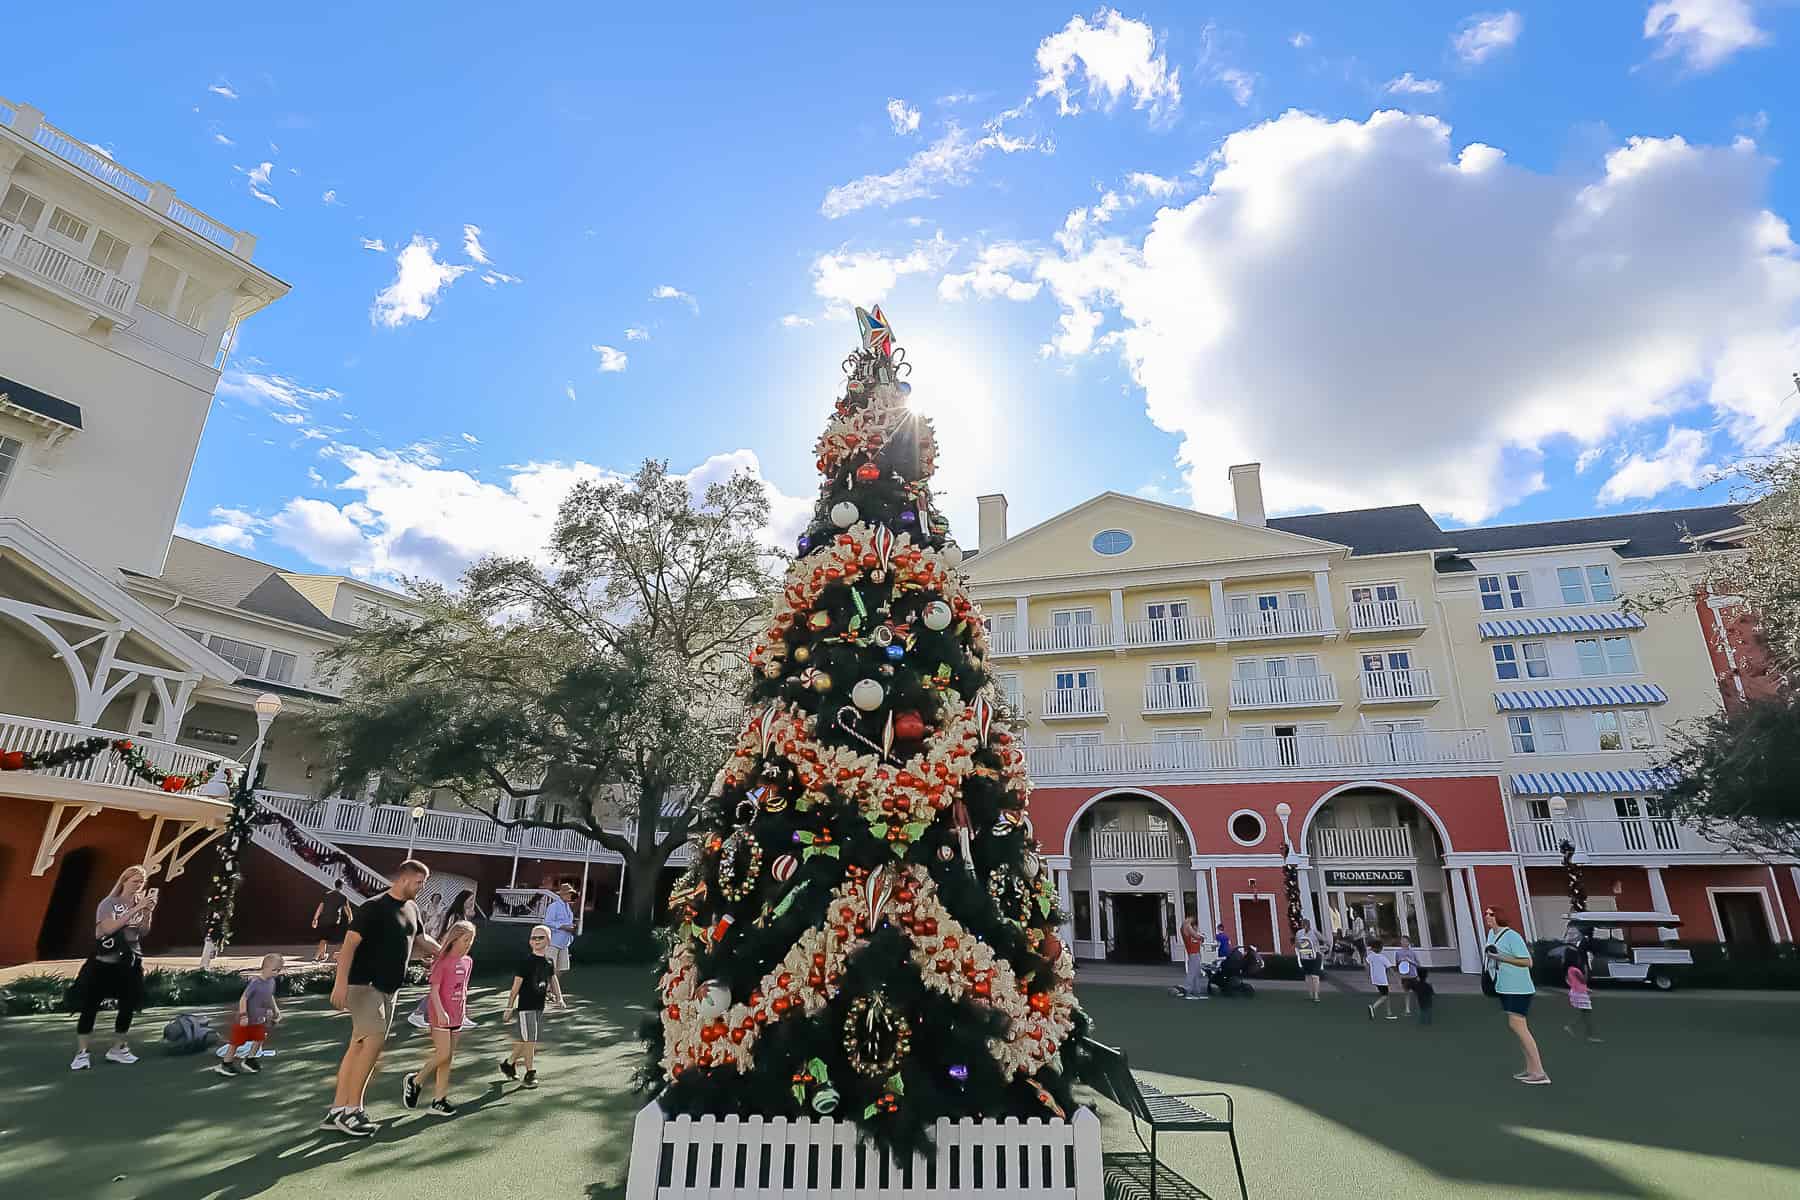 shows lots of families admiring the Christmas tree on the lawn at Disney's Boardwalk